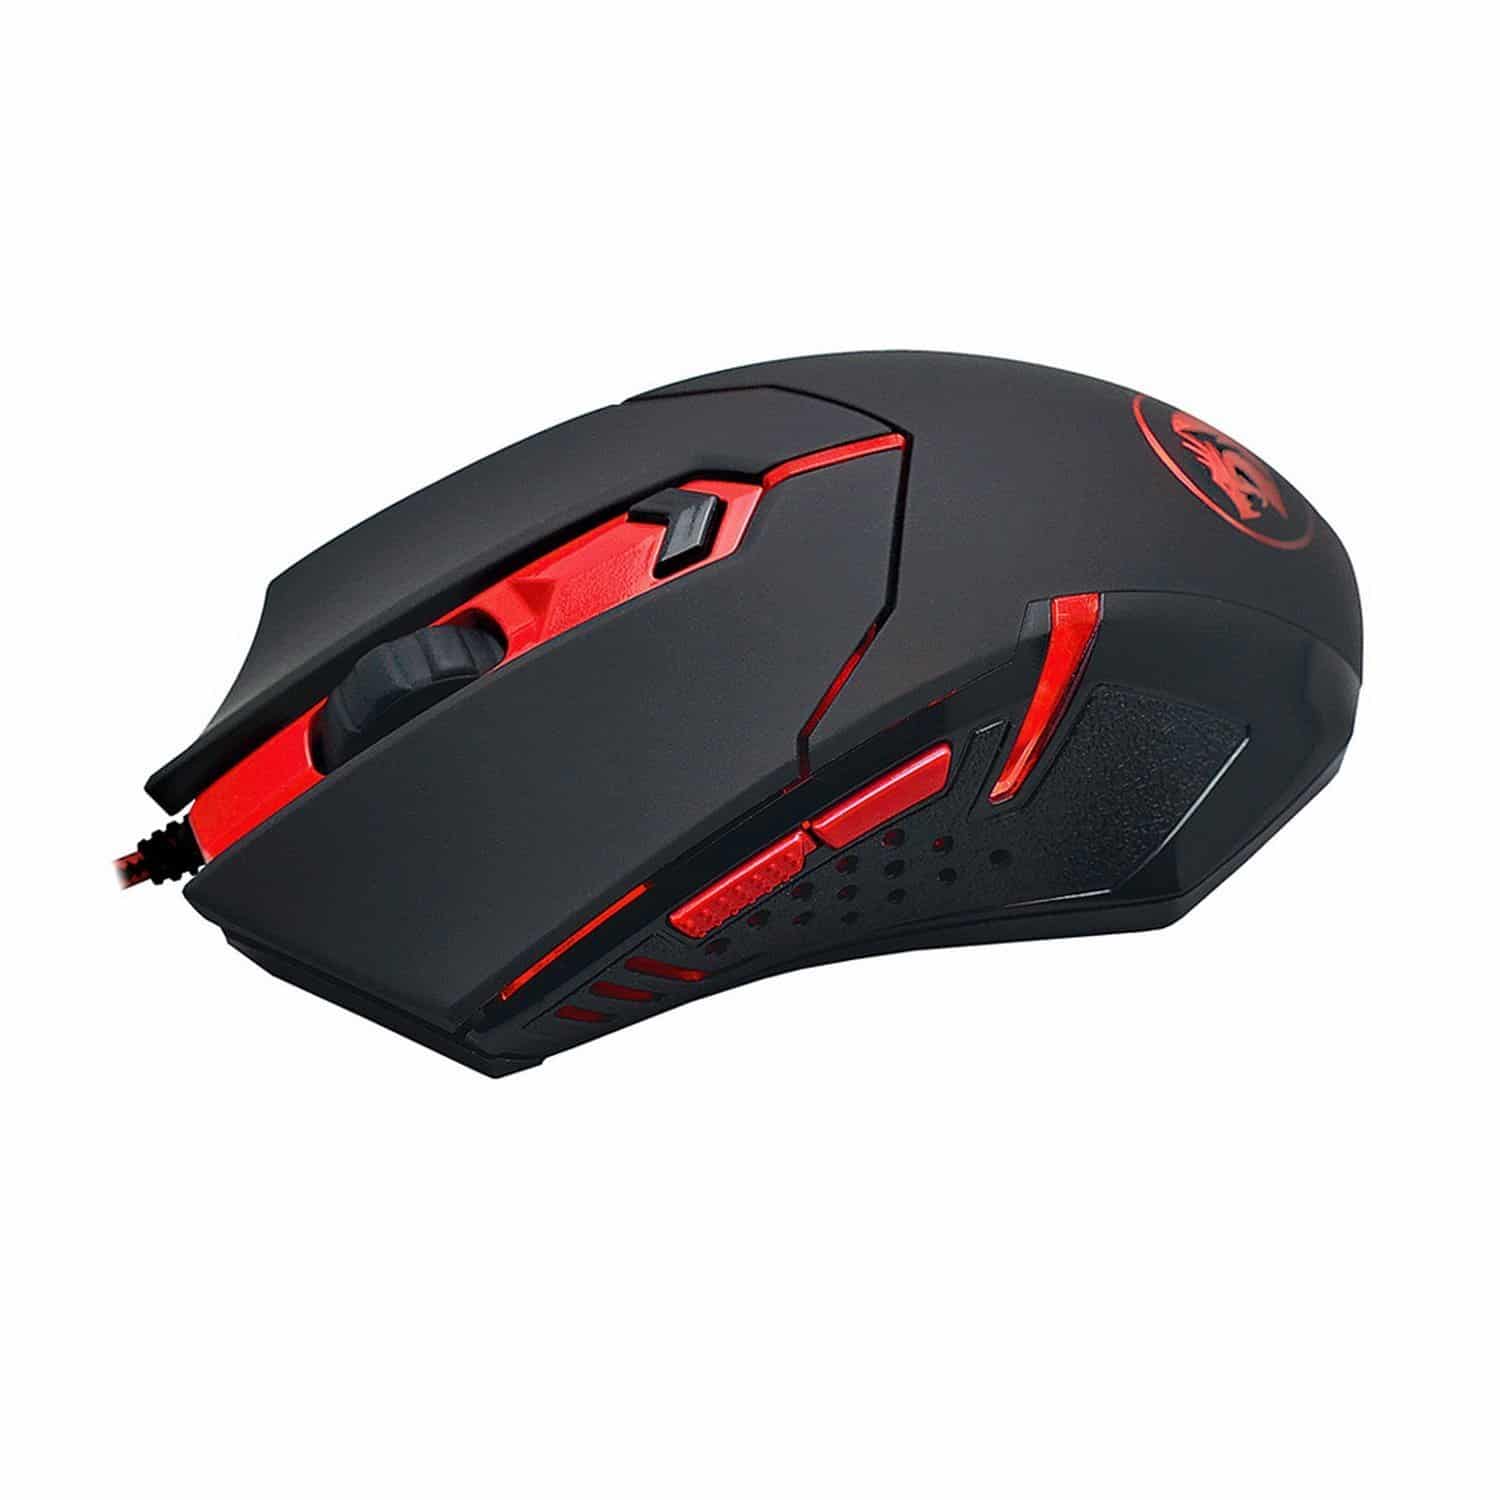 Redragon Gaming Mouse - a great artist's mouse